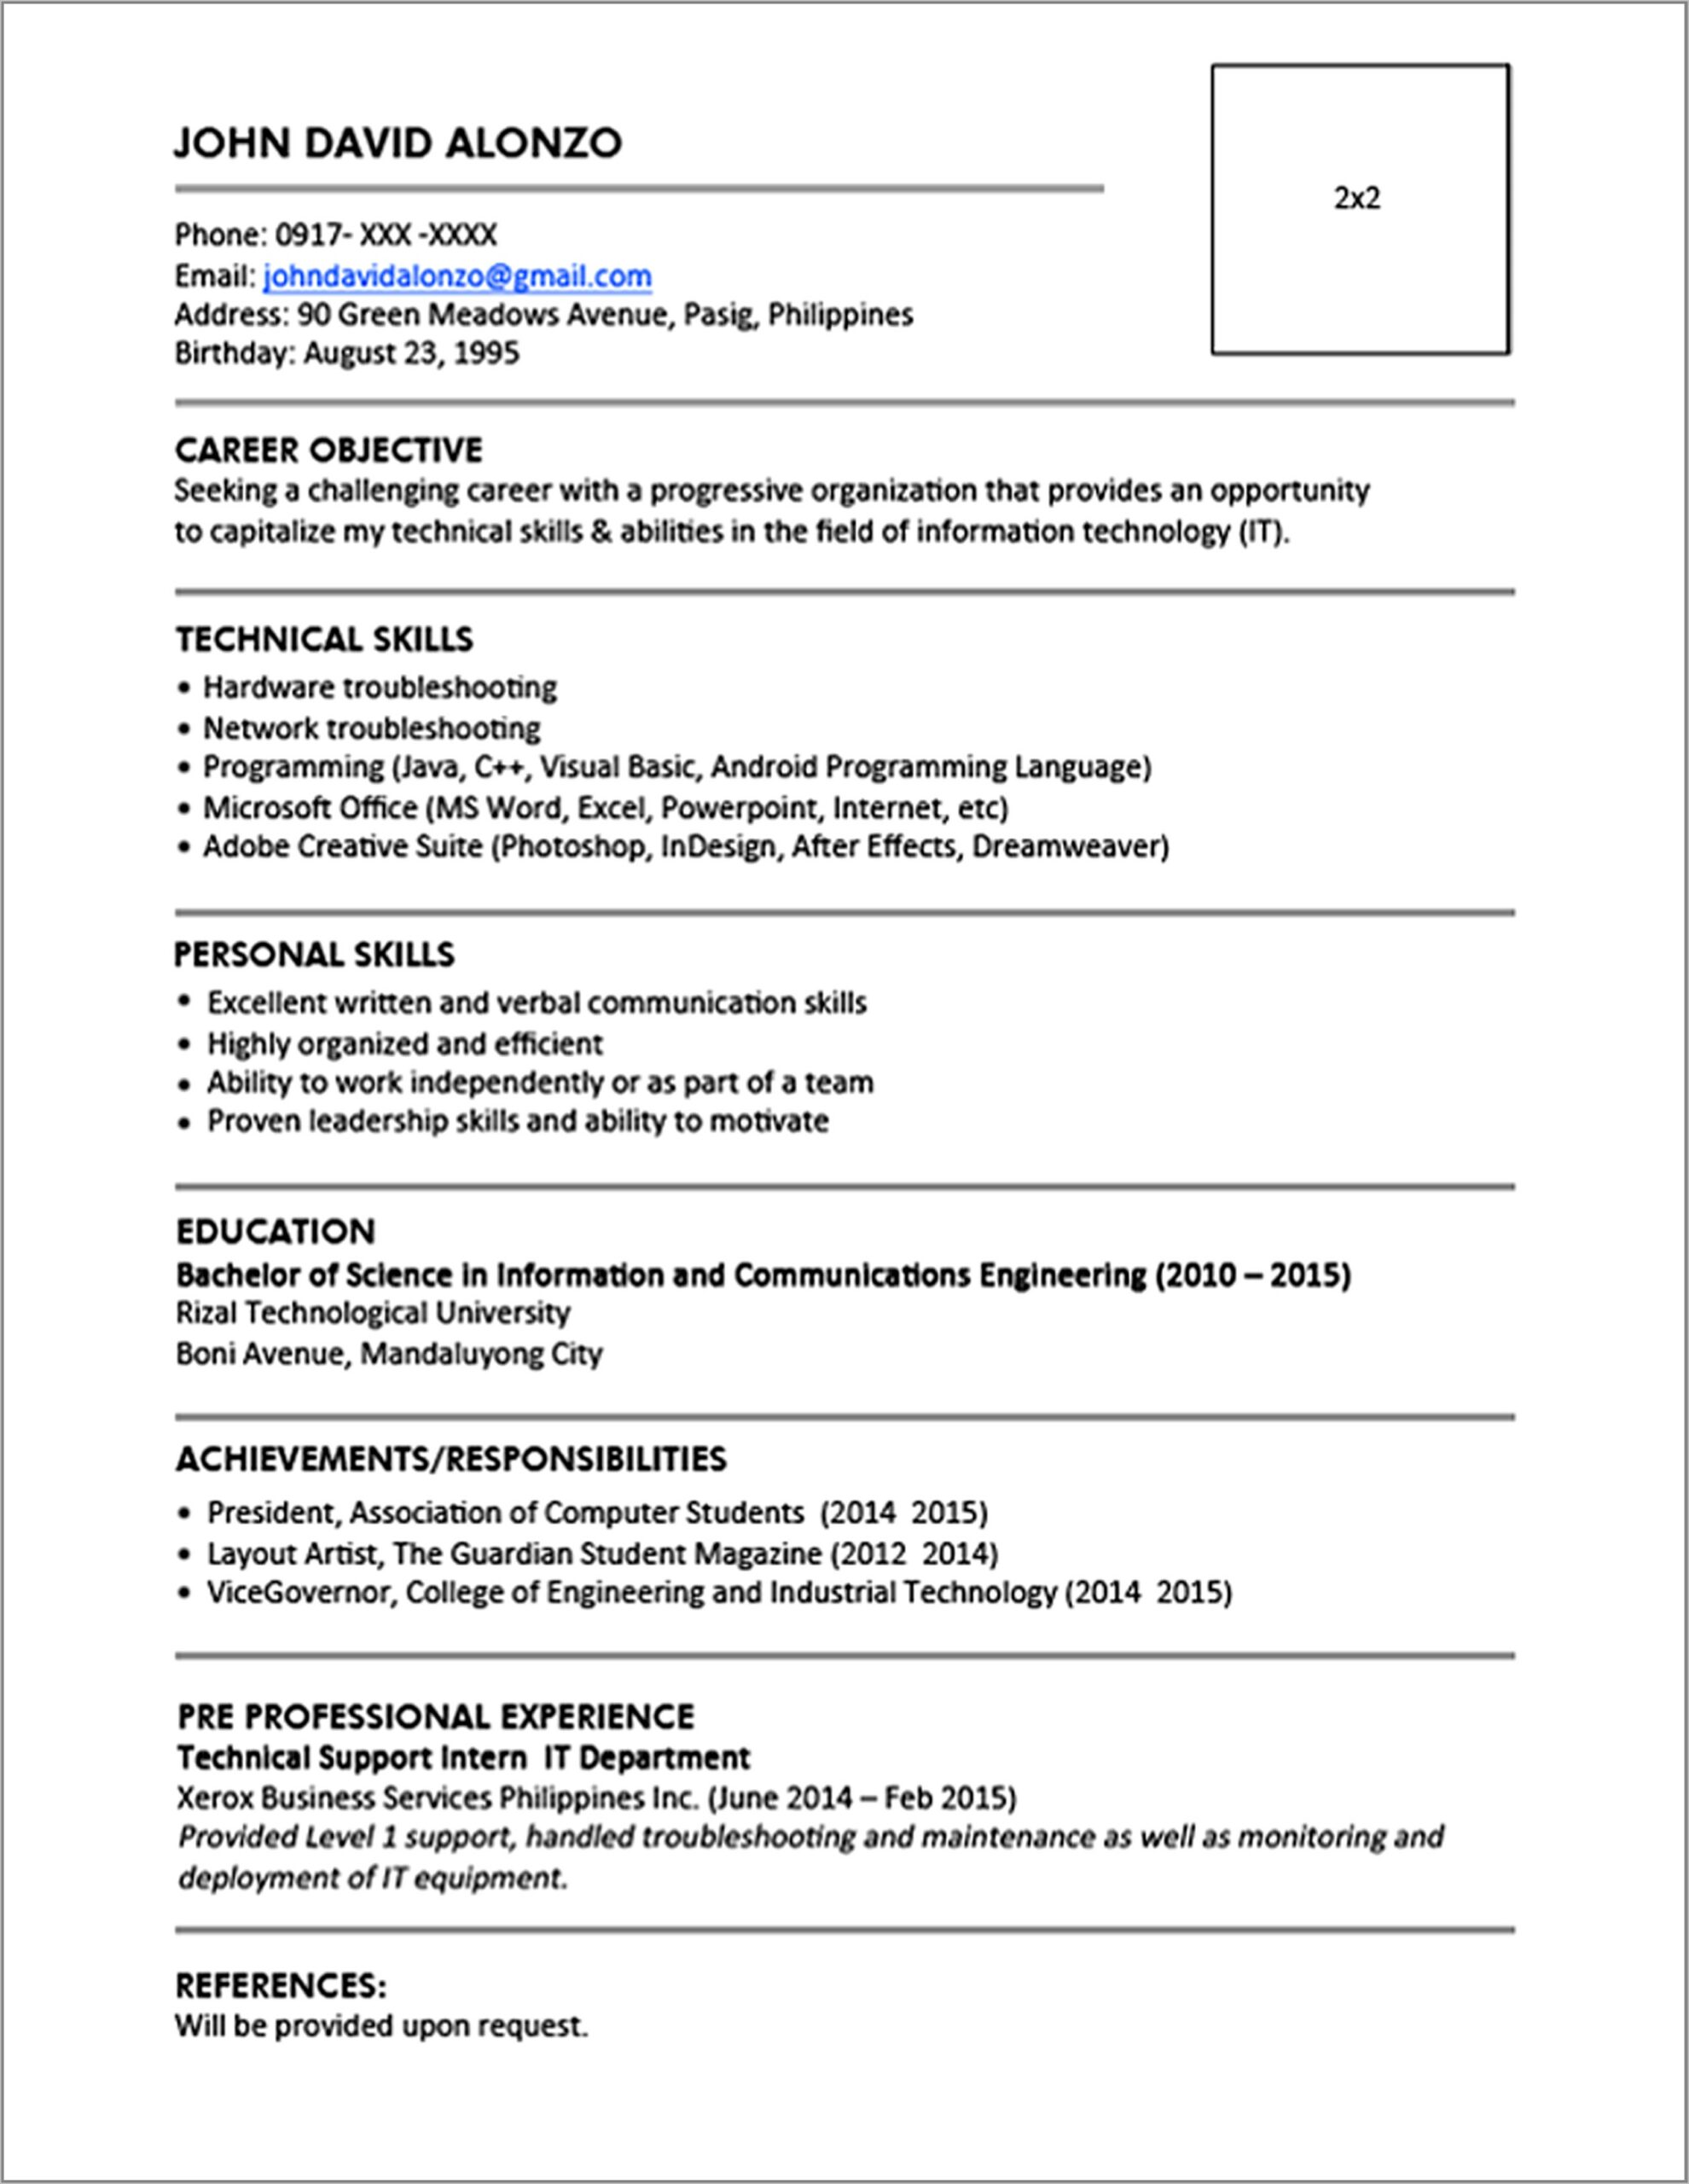 Free Online Resume Search For Employers Philippines